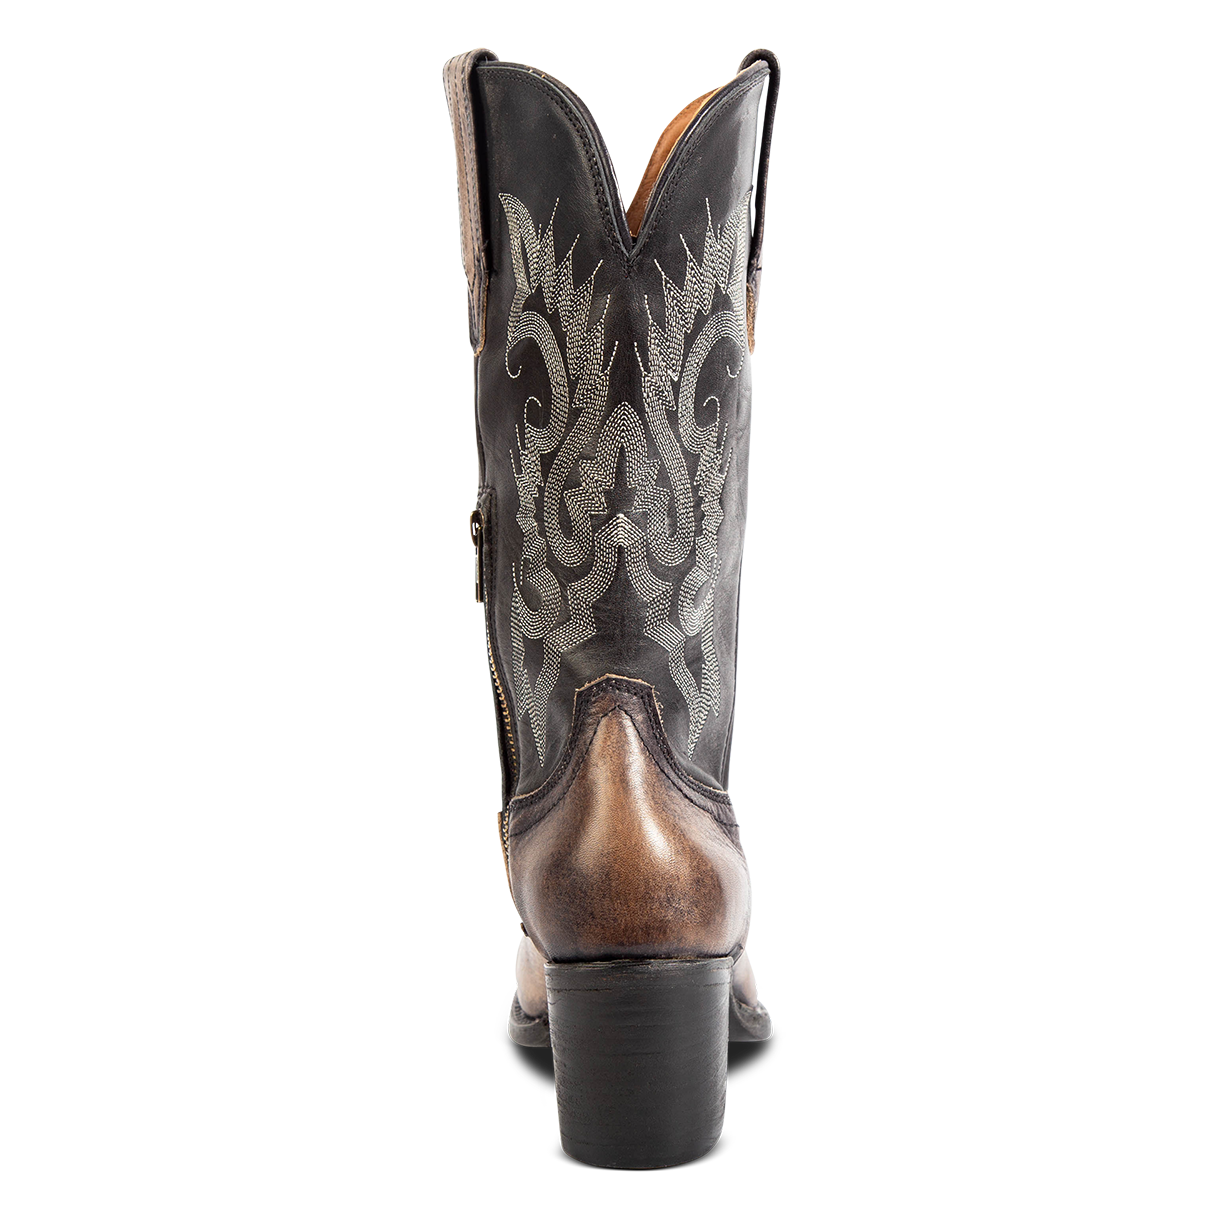 Back view showing a stacked heel, shaft stitch detailing and back dip on FREEBIRD women's Dice black leather boot